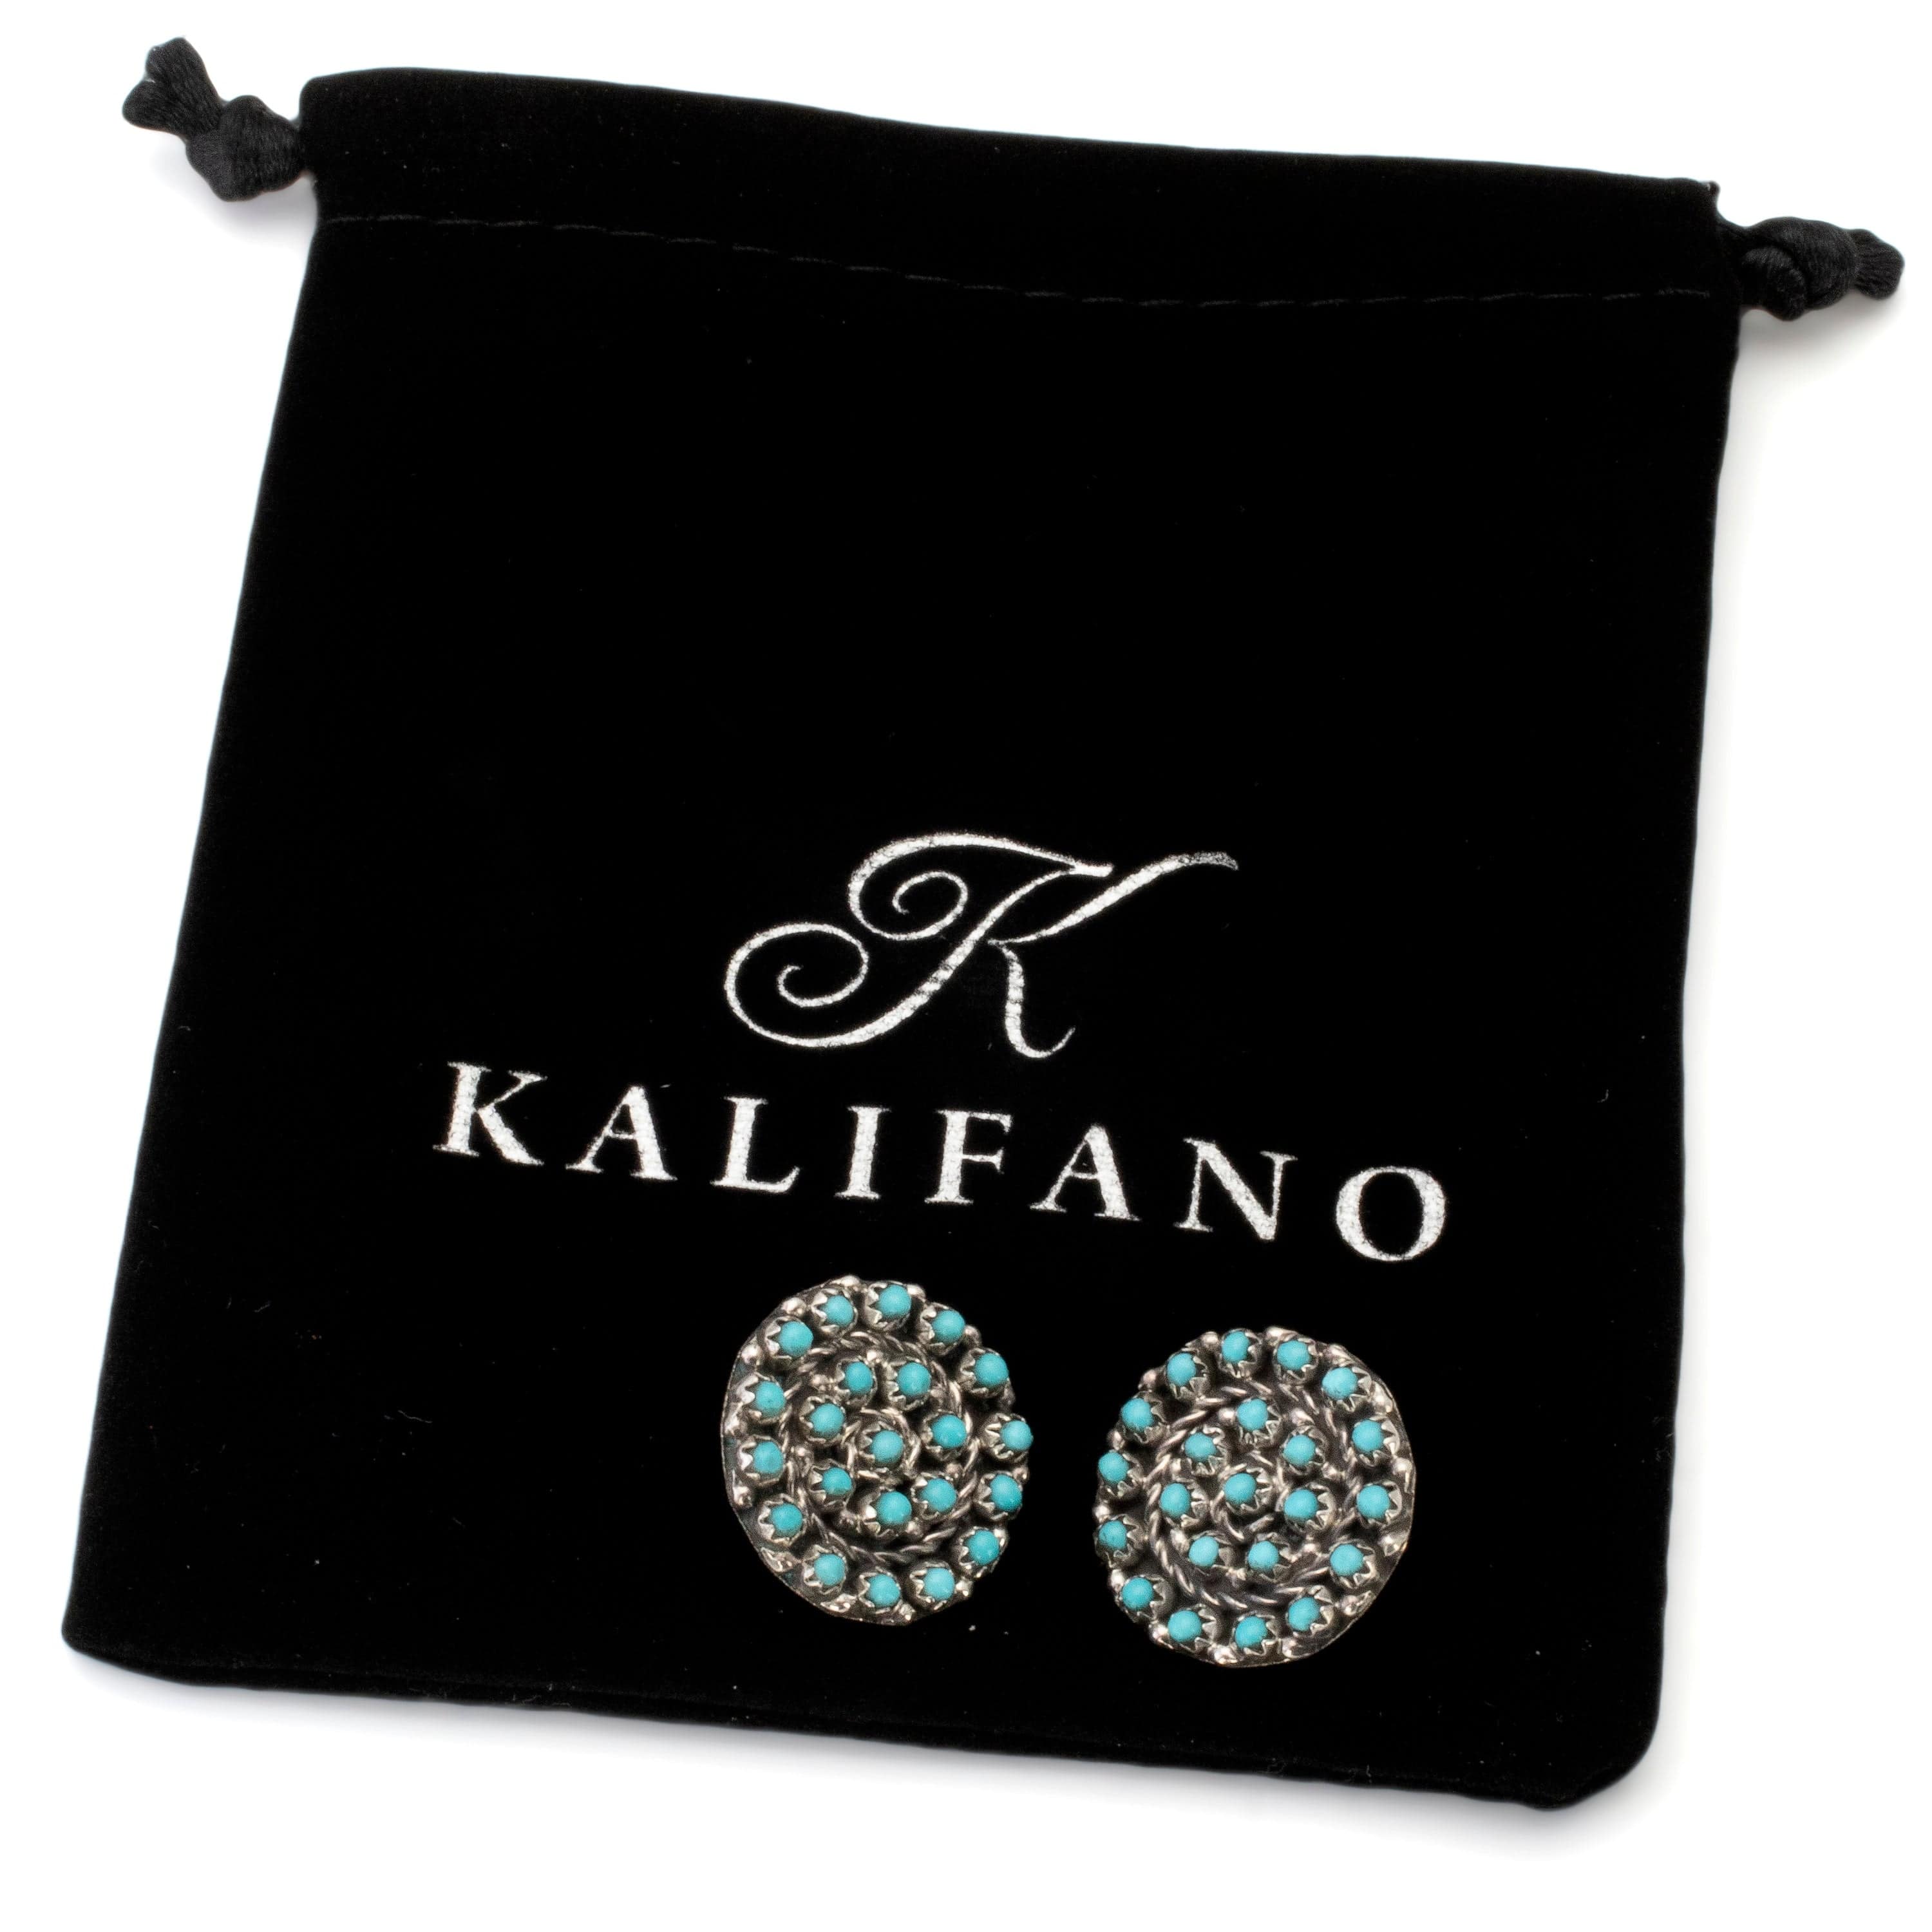 Kalifano Native American Jewelry Kingman Turquoise Zuni Circular Petit Point USA Native American Made Sterling Silver Earrings with Stud Backing NAE800.004